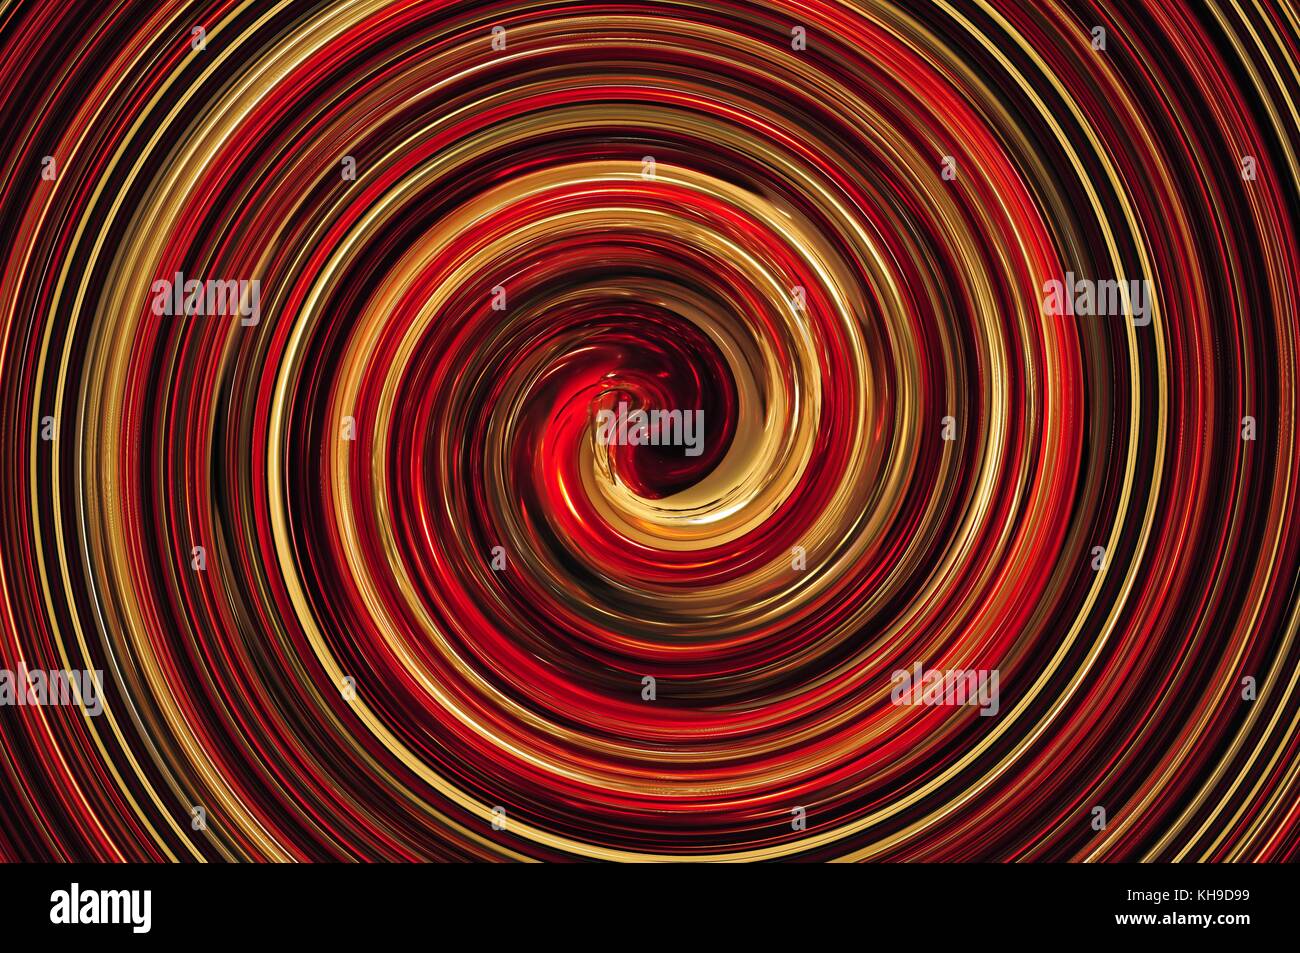 Illusion-digital spiral art with black, golden and blue colors. Stock Photo